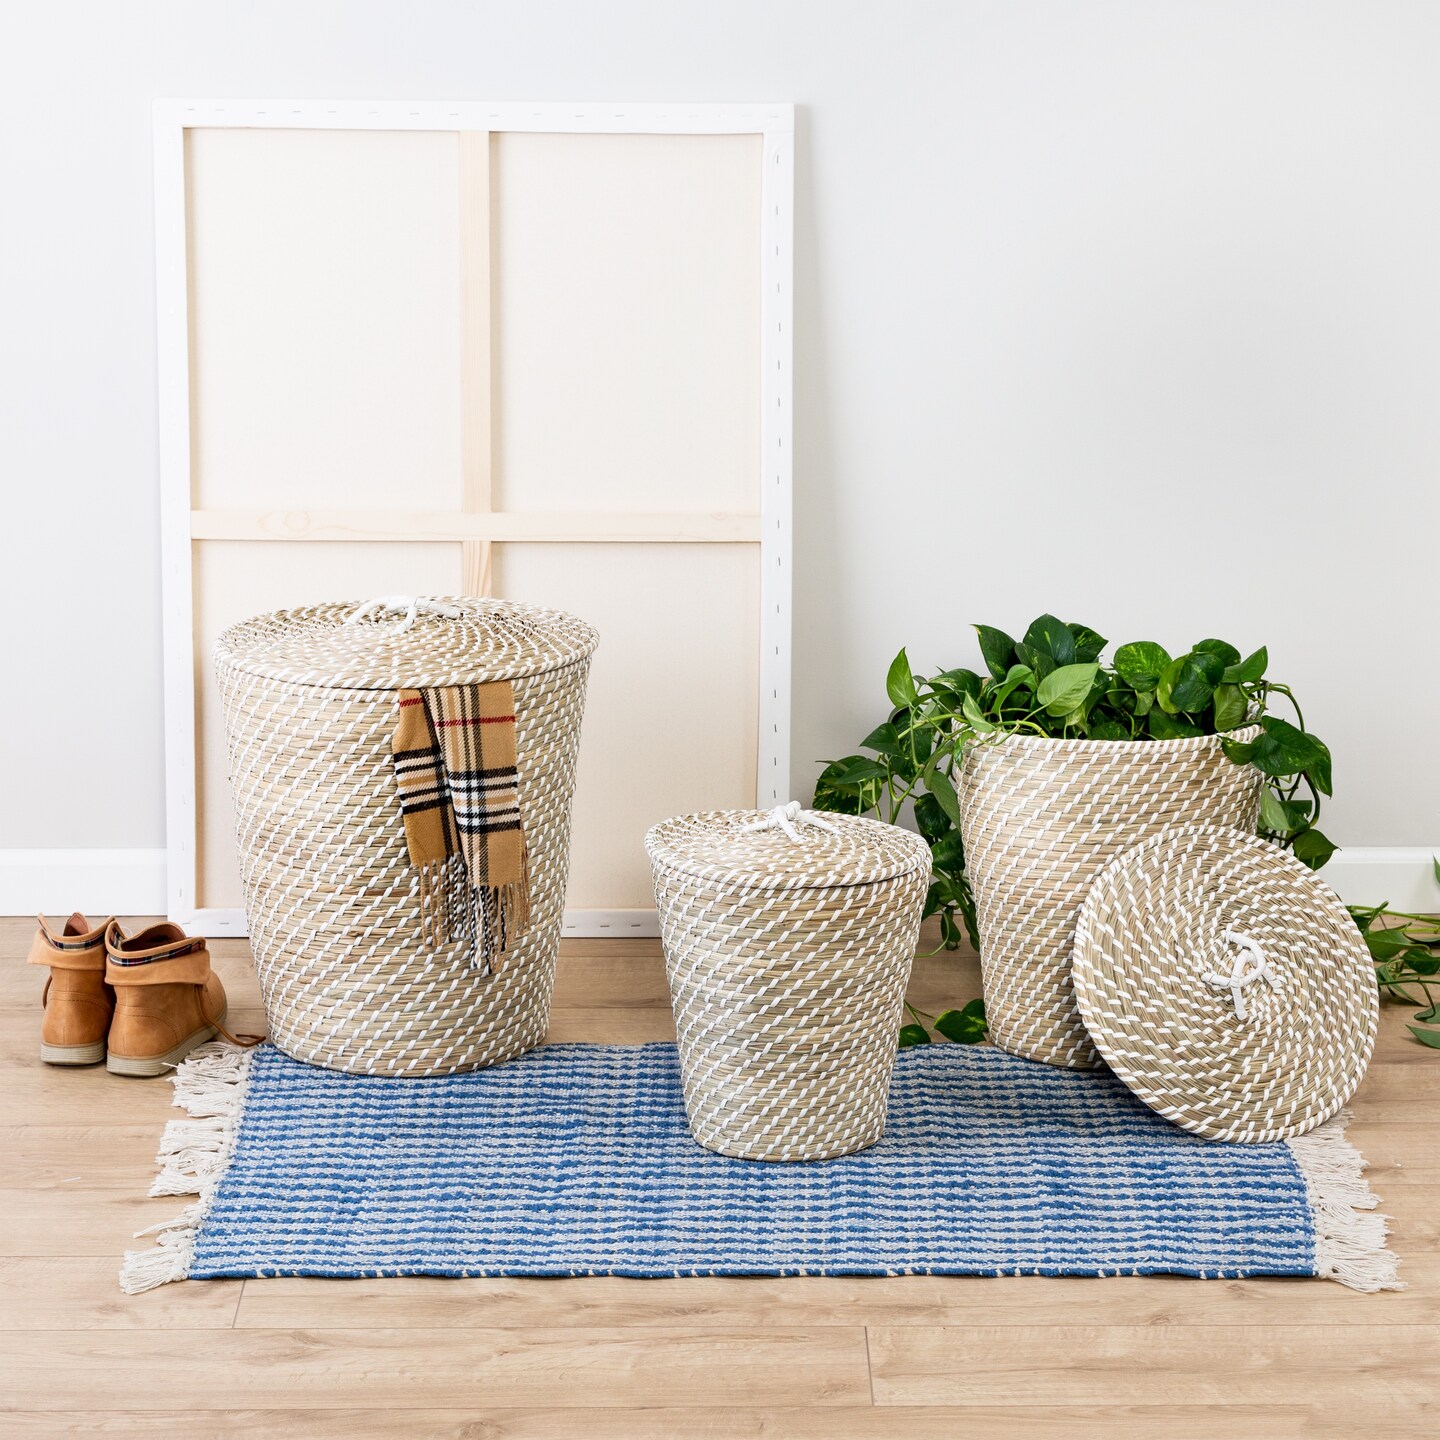 Soft woven baskets sitting on top of a blue rug